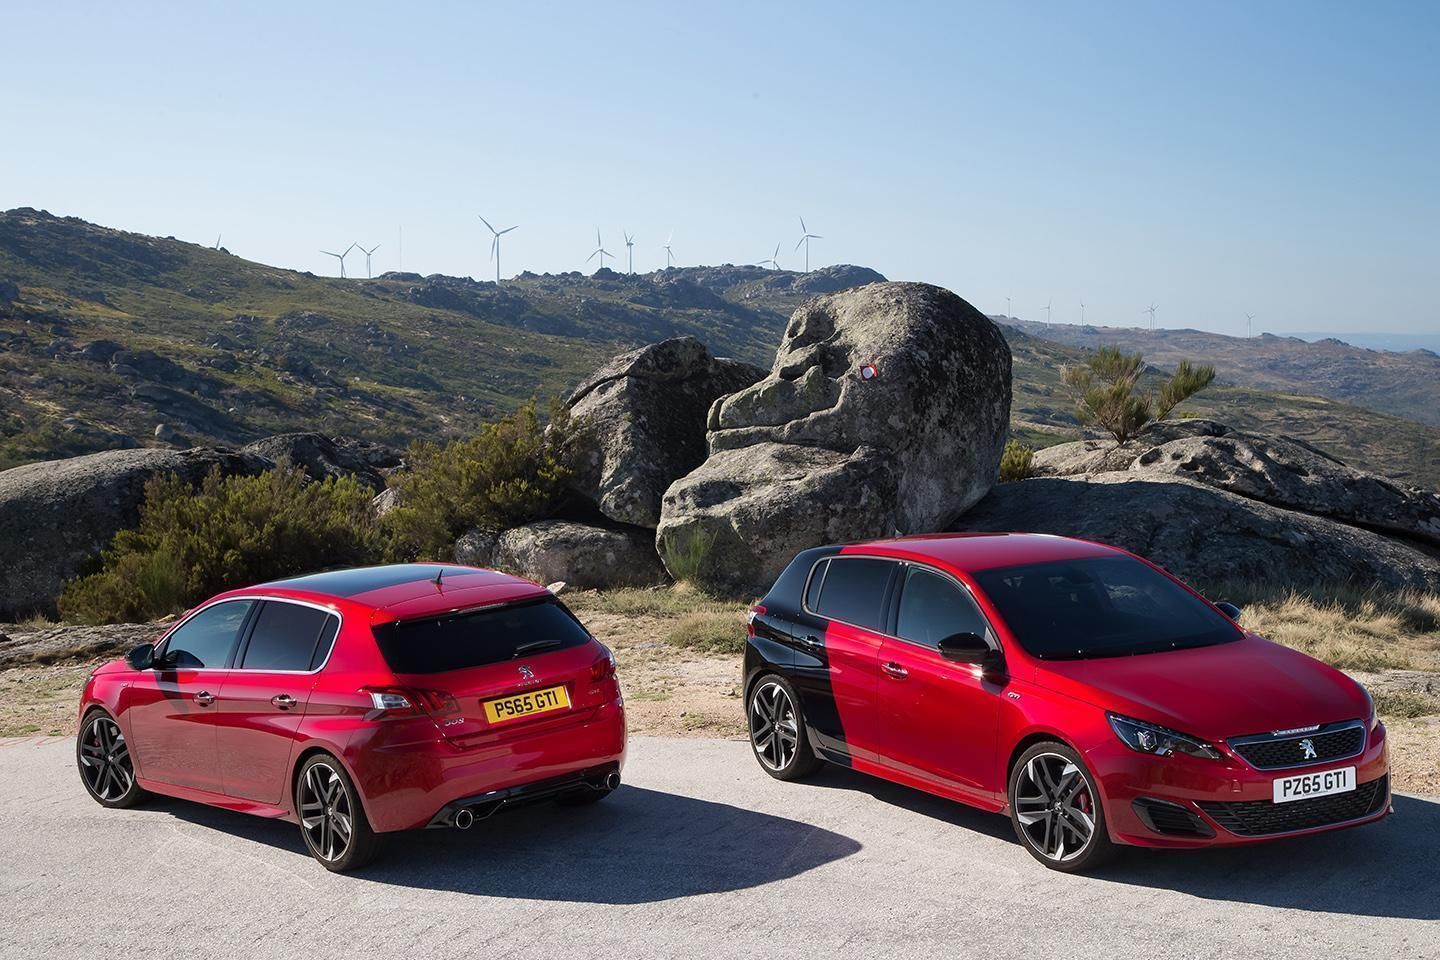 Peugeot 308 GTi Loses 7 PS To Comply With New Emissions Standards